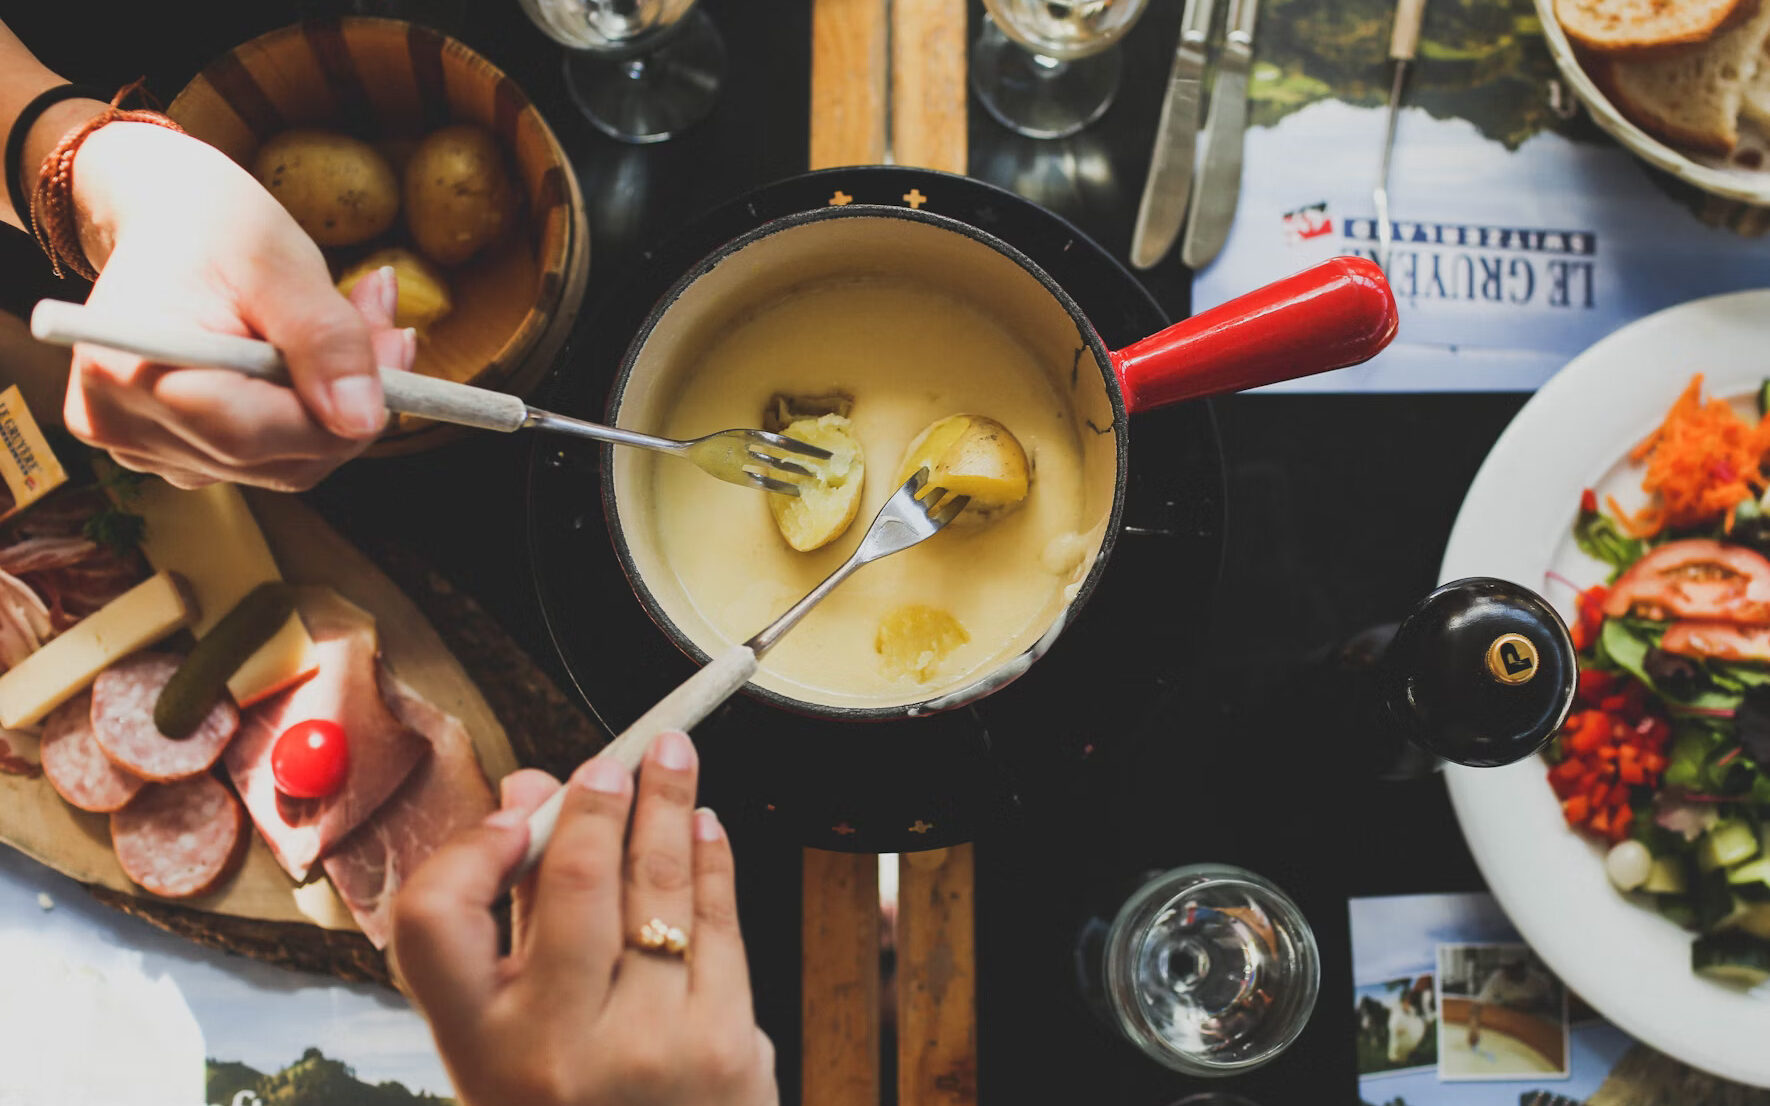 Two people dipping potatoes into a cheese fondue pot.